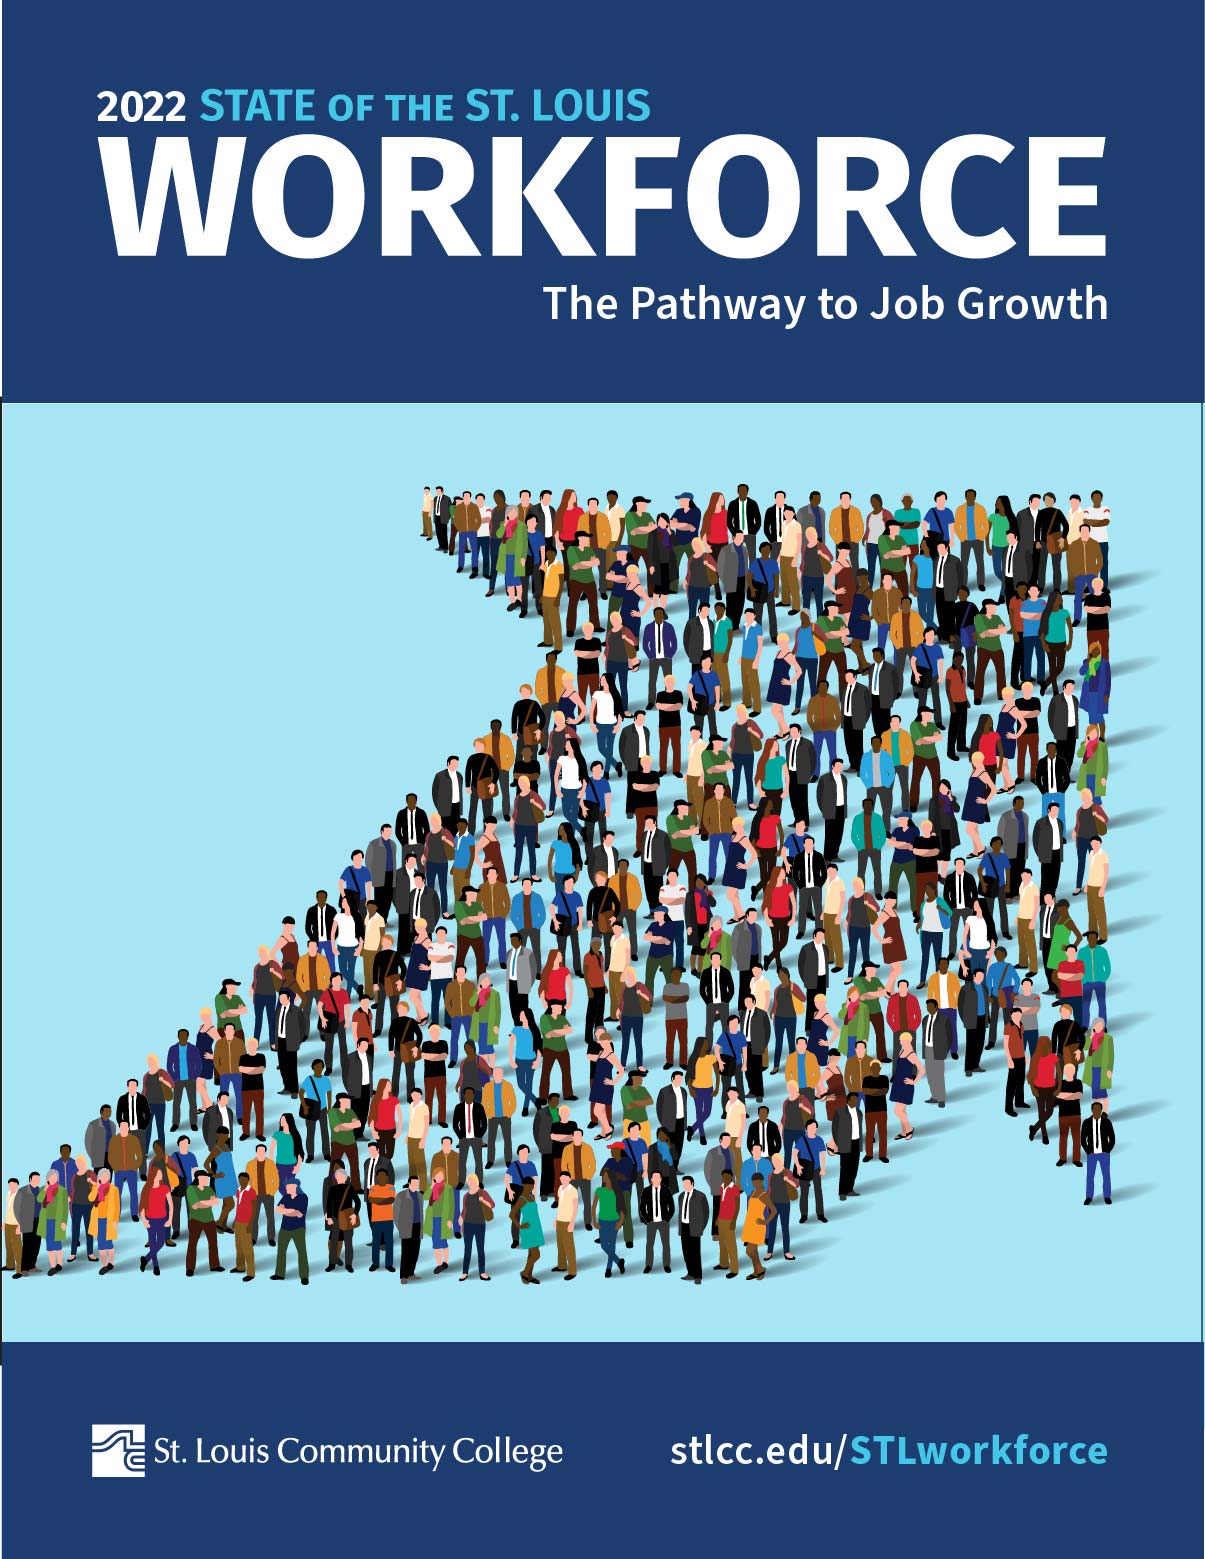 State of St. Louis Workforce report 2022